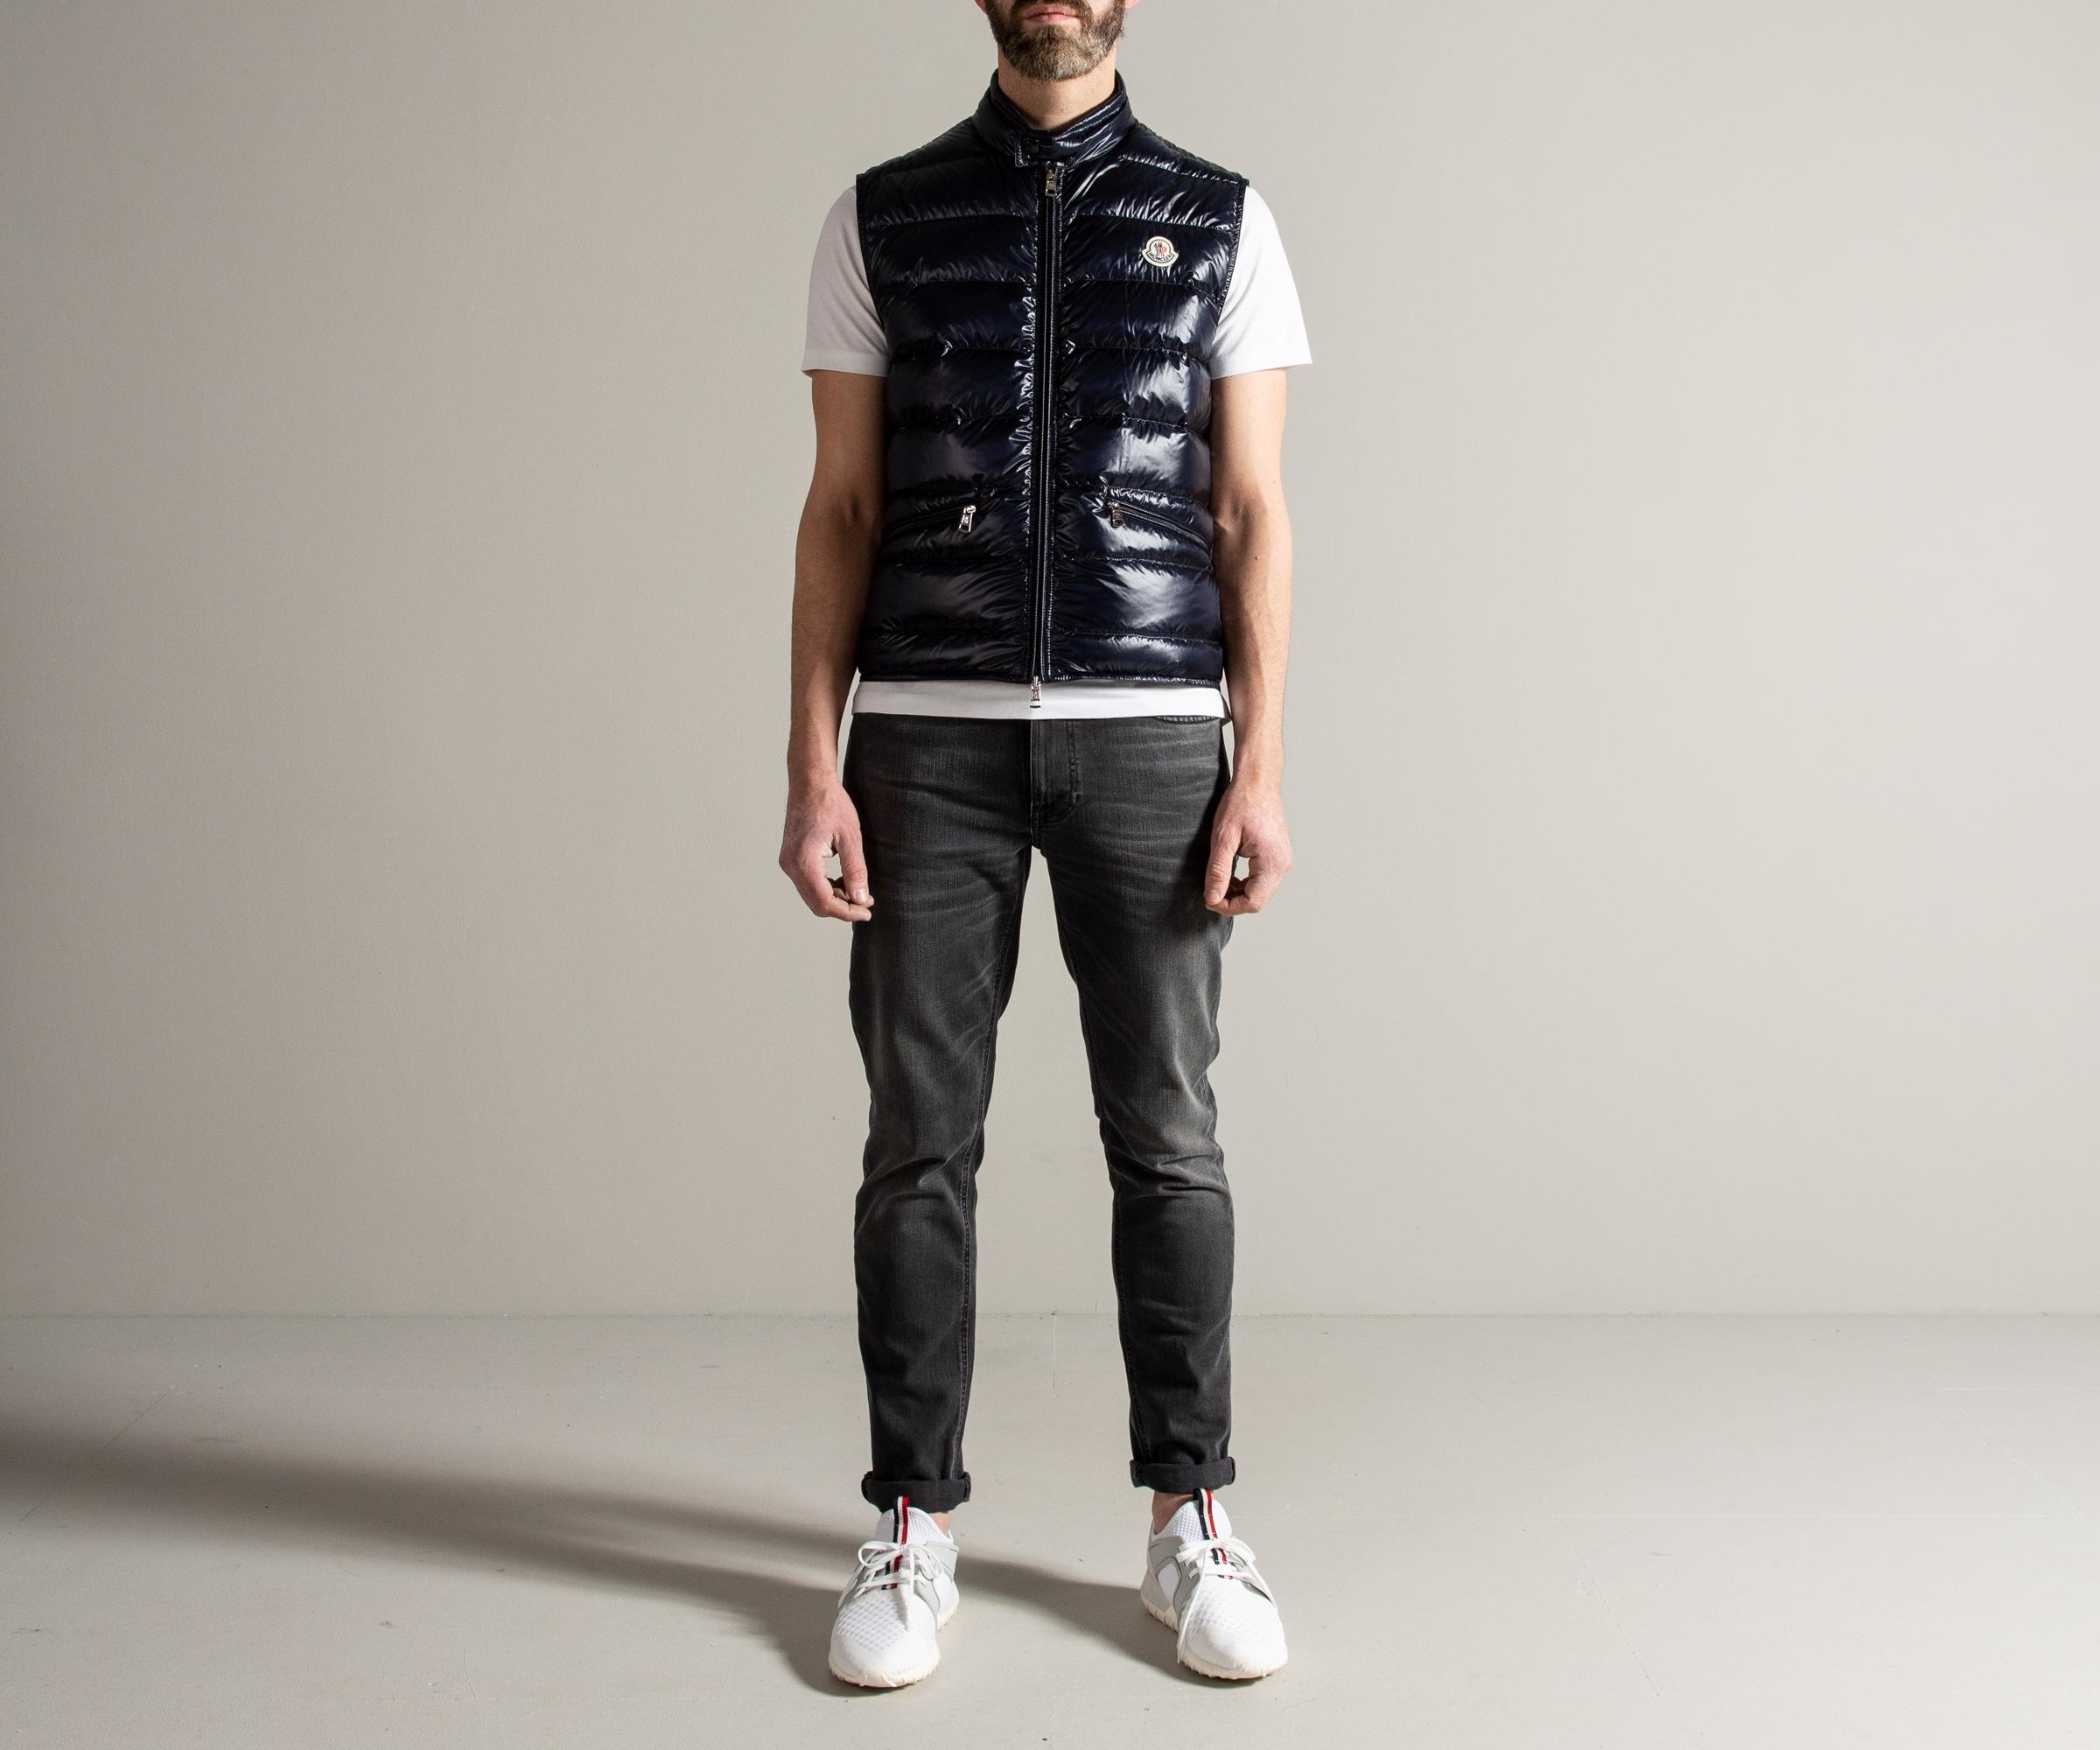 Moncler Synthetic 'gui' Gilet Navy in Blue for Men - Lyst